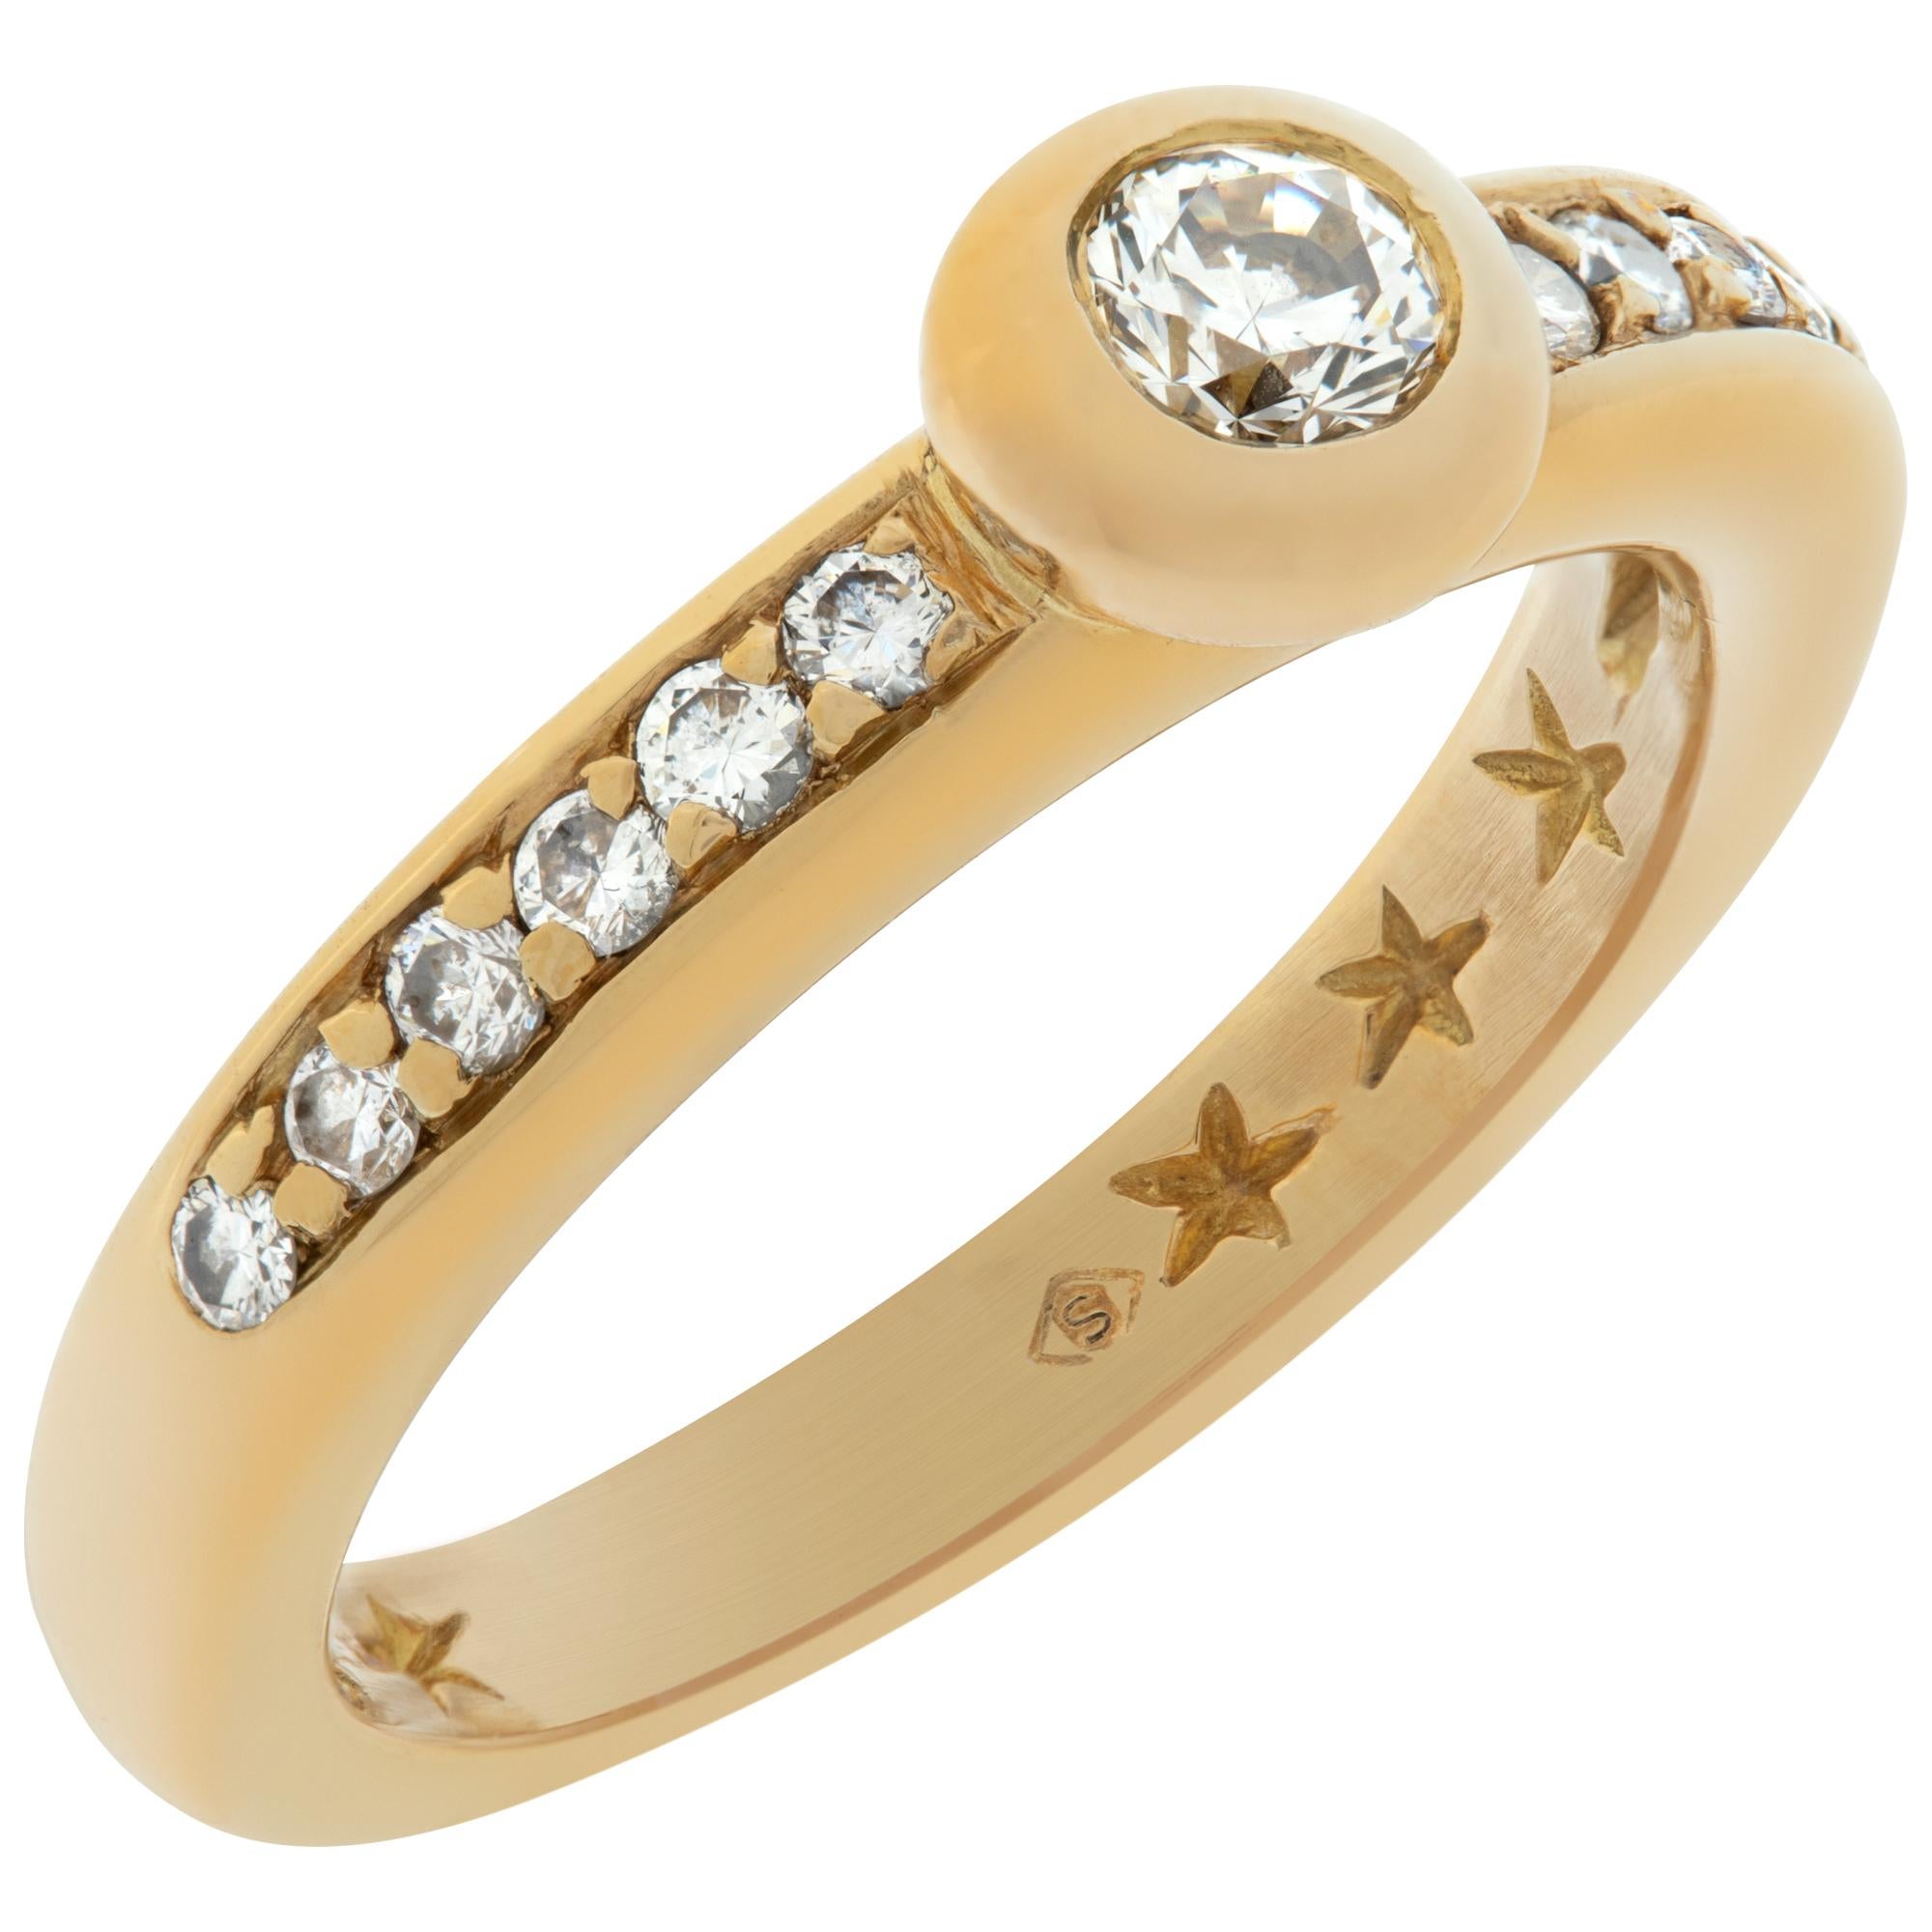 Yellow gold diamond ring with center bezel set diamond with side diamond accents In Excellent Condition For Sale In Surfside, FL